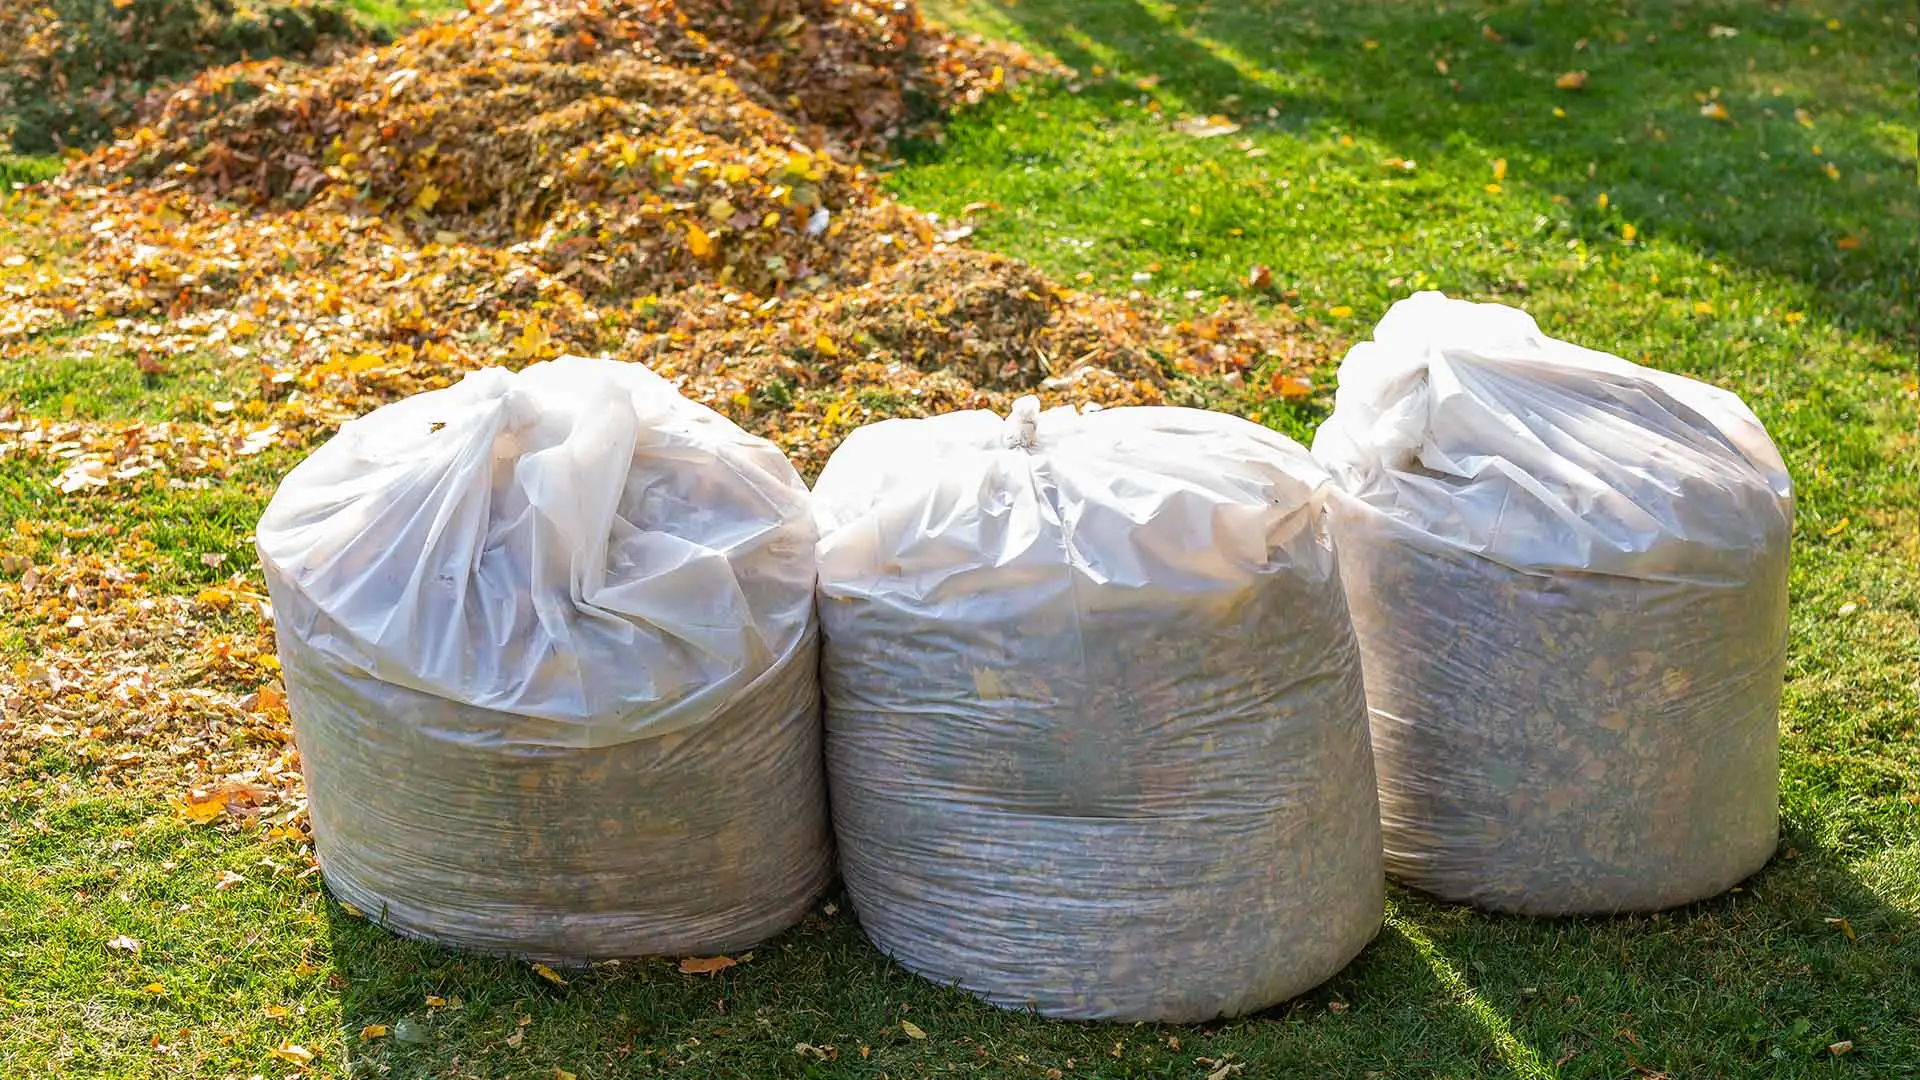 Bagged leaves for leaf removal service in Denton, TX.